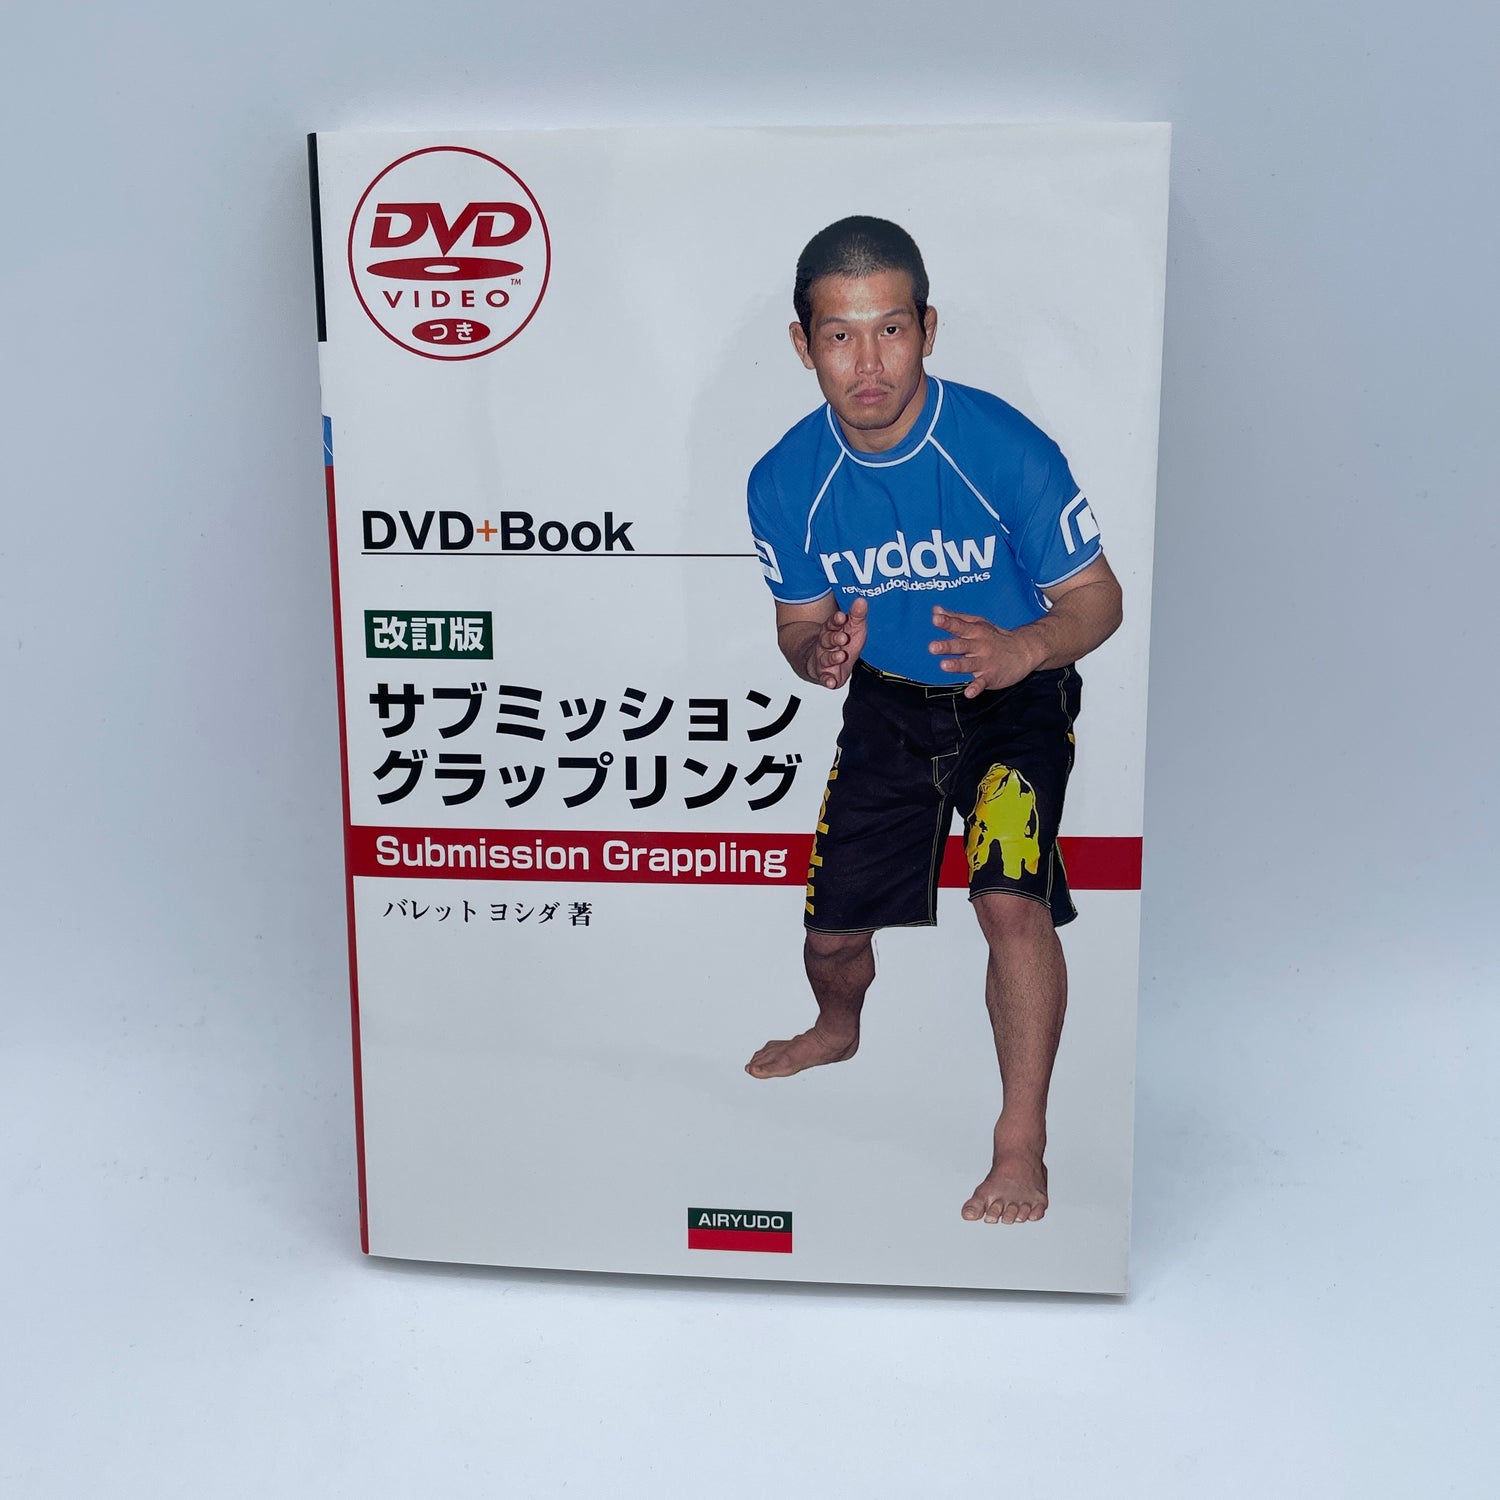 Principles of the Art of Submission Grappling Book & DVD by Baret Yoshida